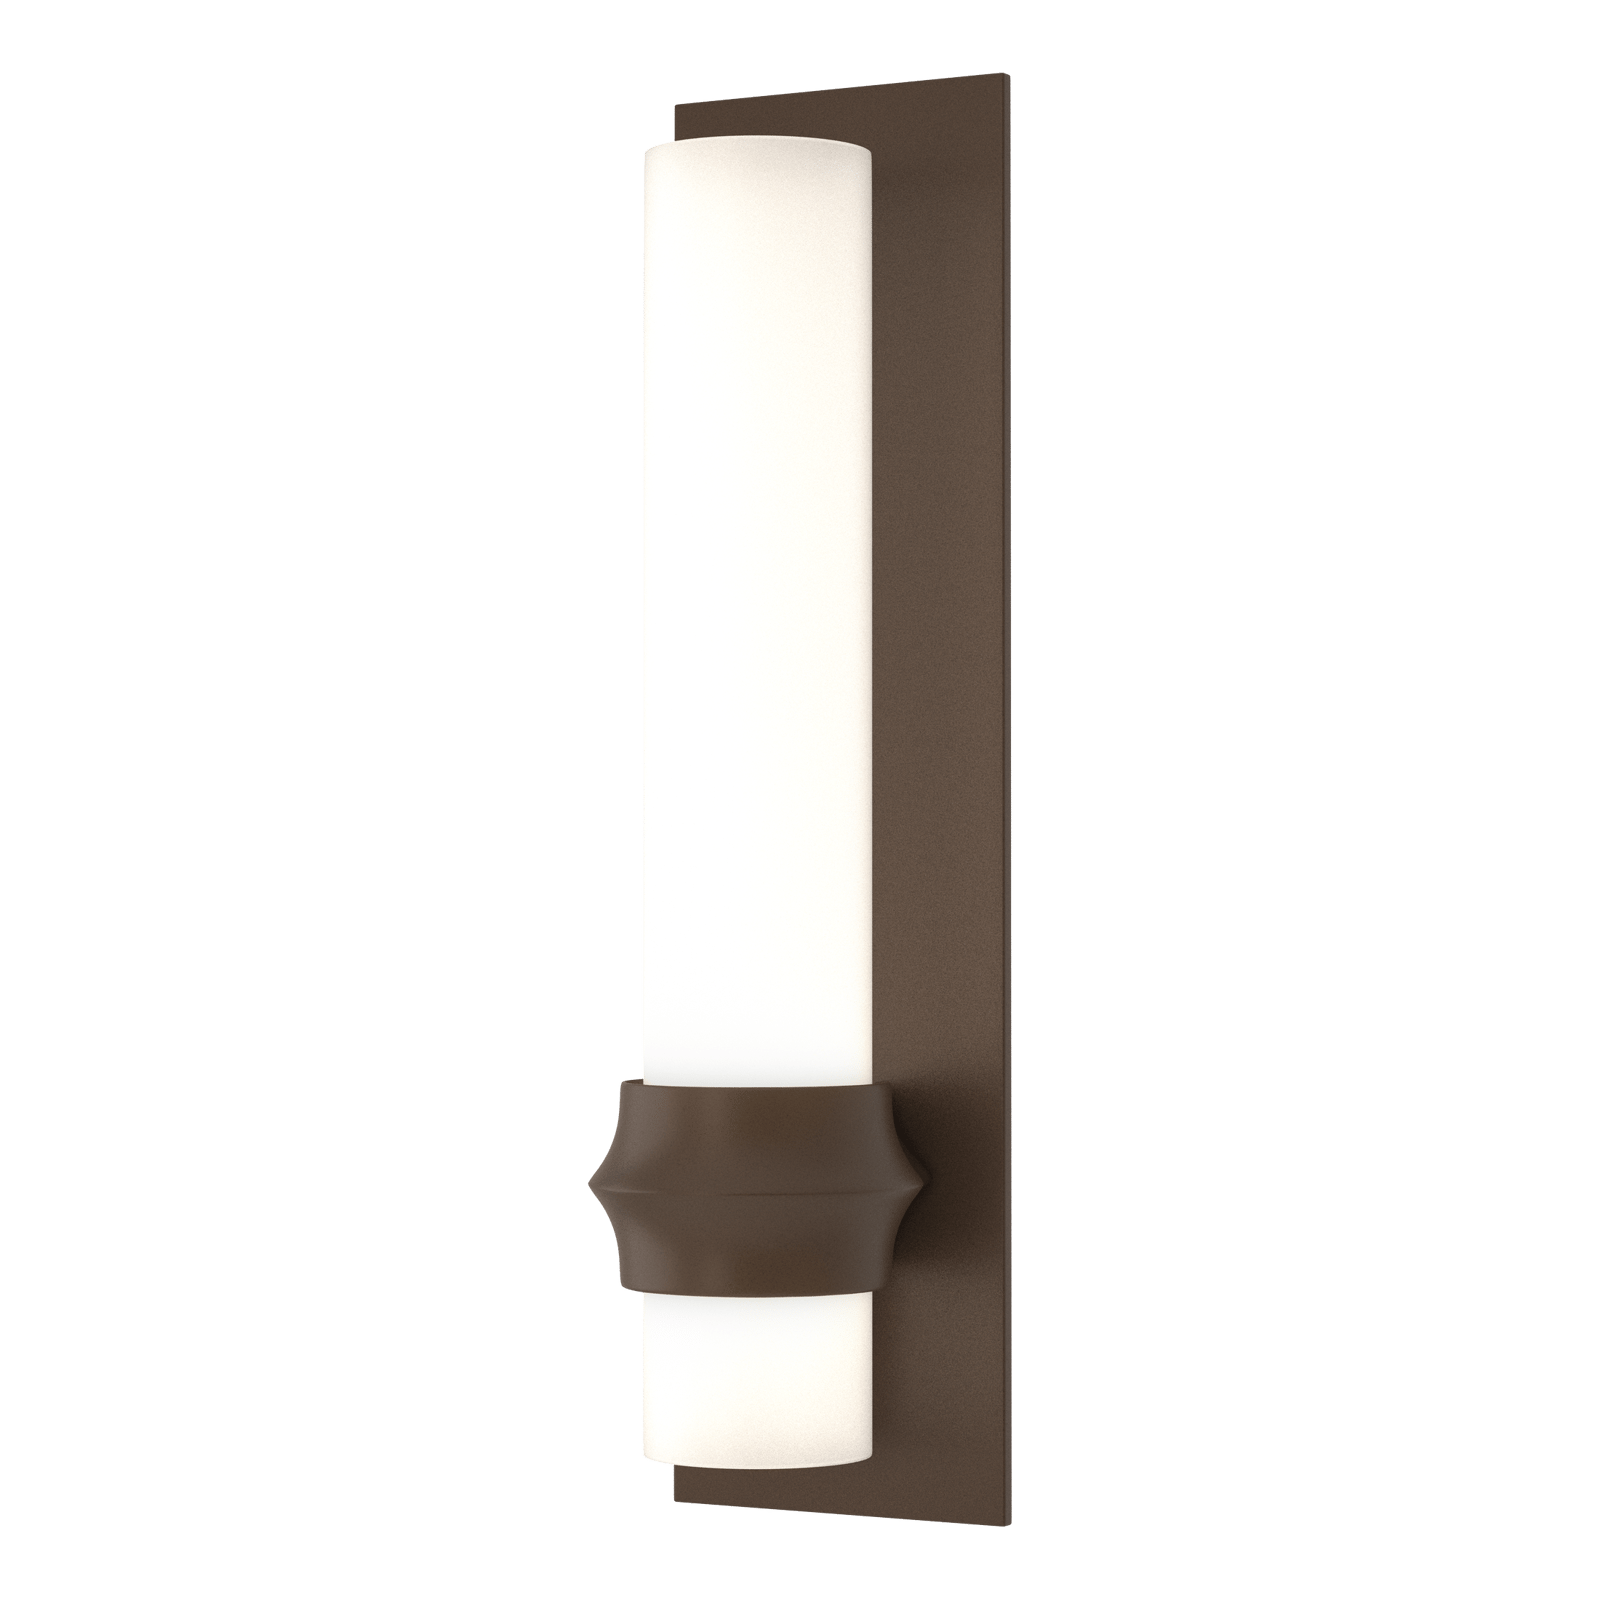 Hubbardton Forge Rook Large Outdoor Sconce